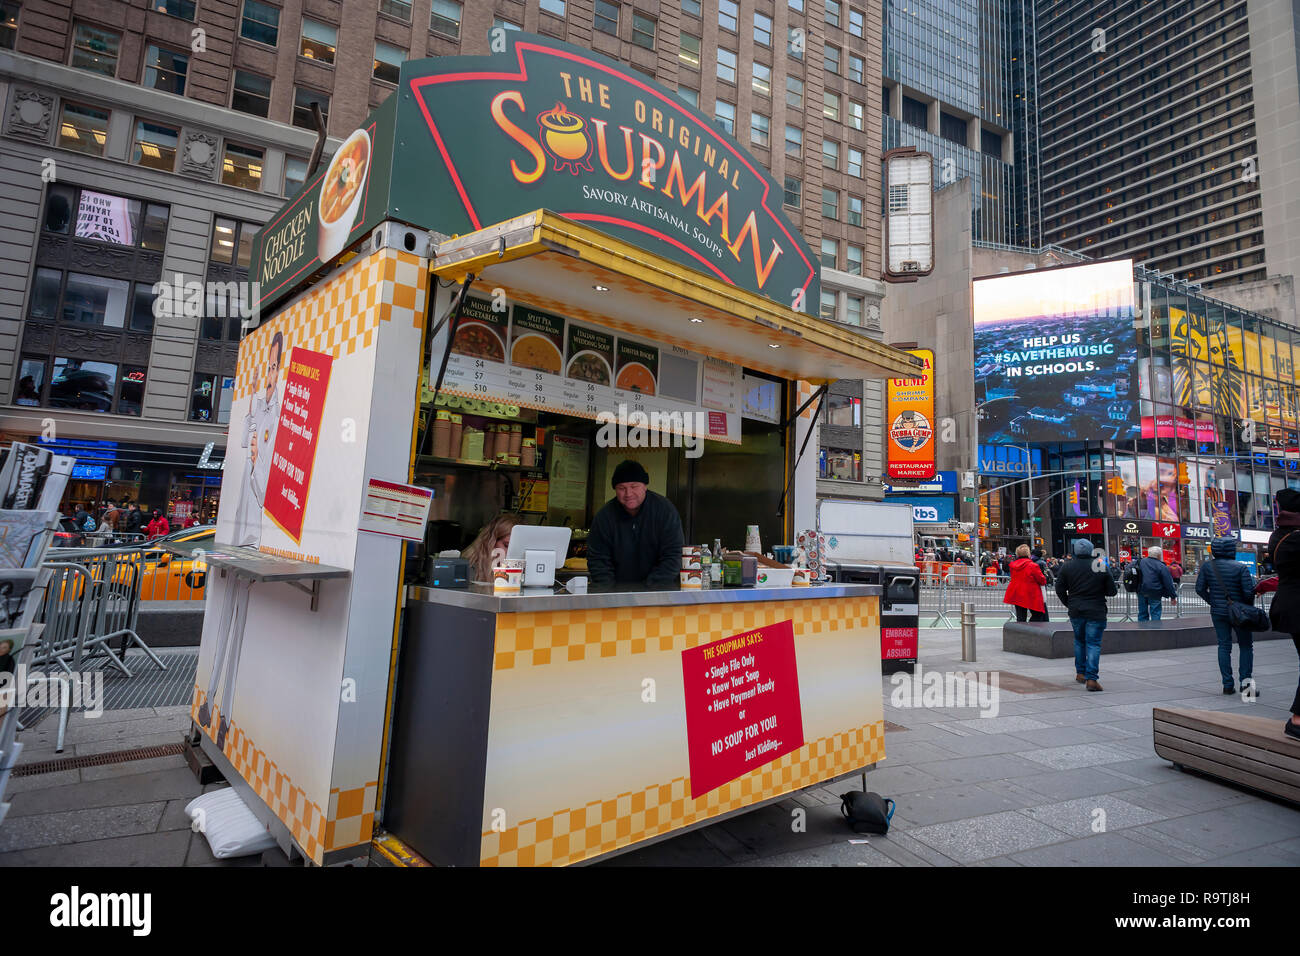 New York,NY/USA-December 17, 2018 The kiosk of the Original Soupman serves soup for you in Times Square in New York on Monday, December 17, 2018. The presence in Times Square is its first brick-and-mortar store since emerging from bankruptcy with new owners. The company also supplies New York City public schools and is available in many delis and supermarkets. (© Richard B. Levine) Stock Photo